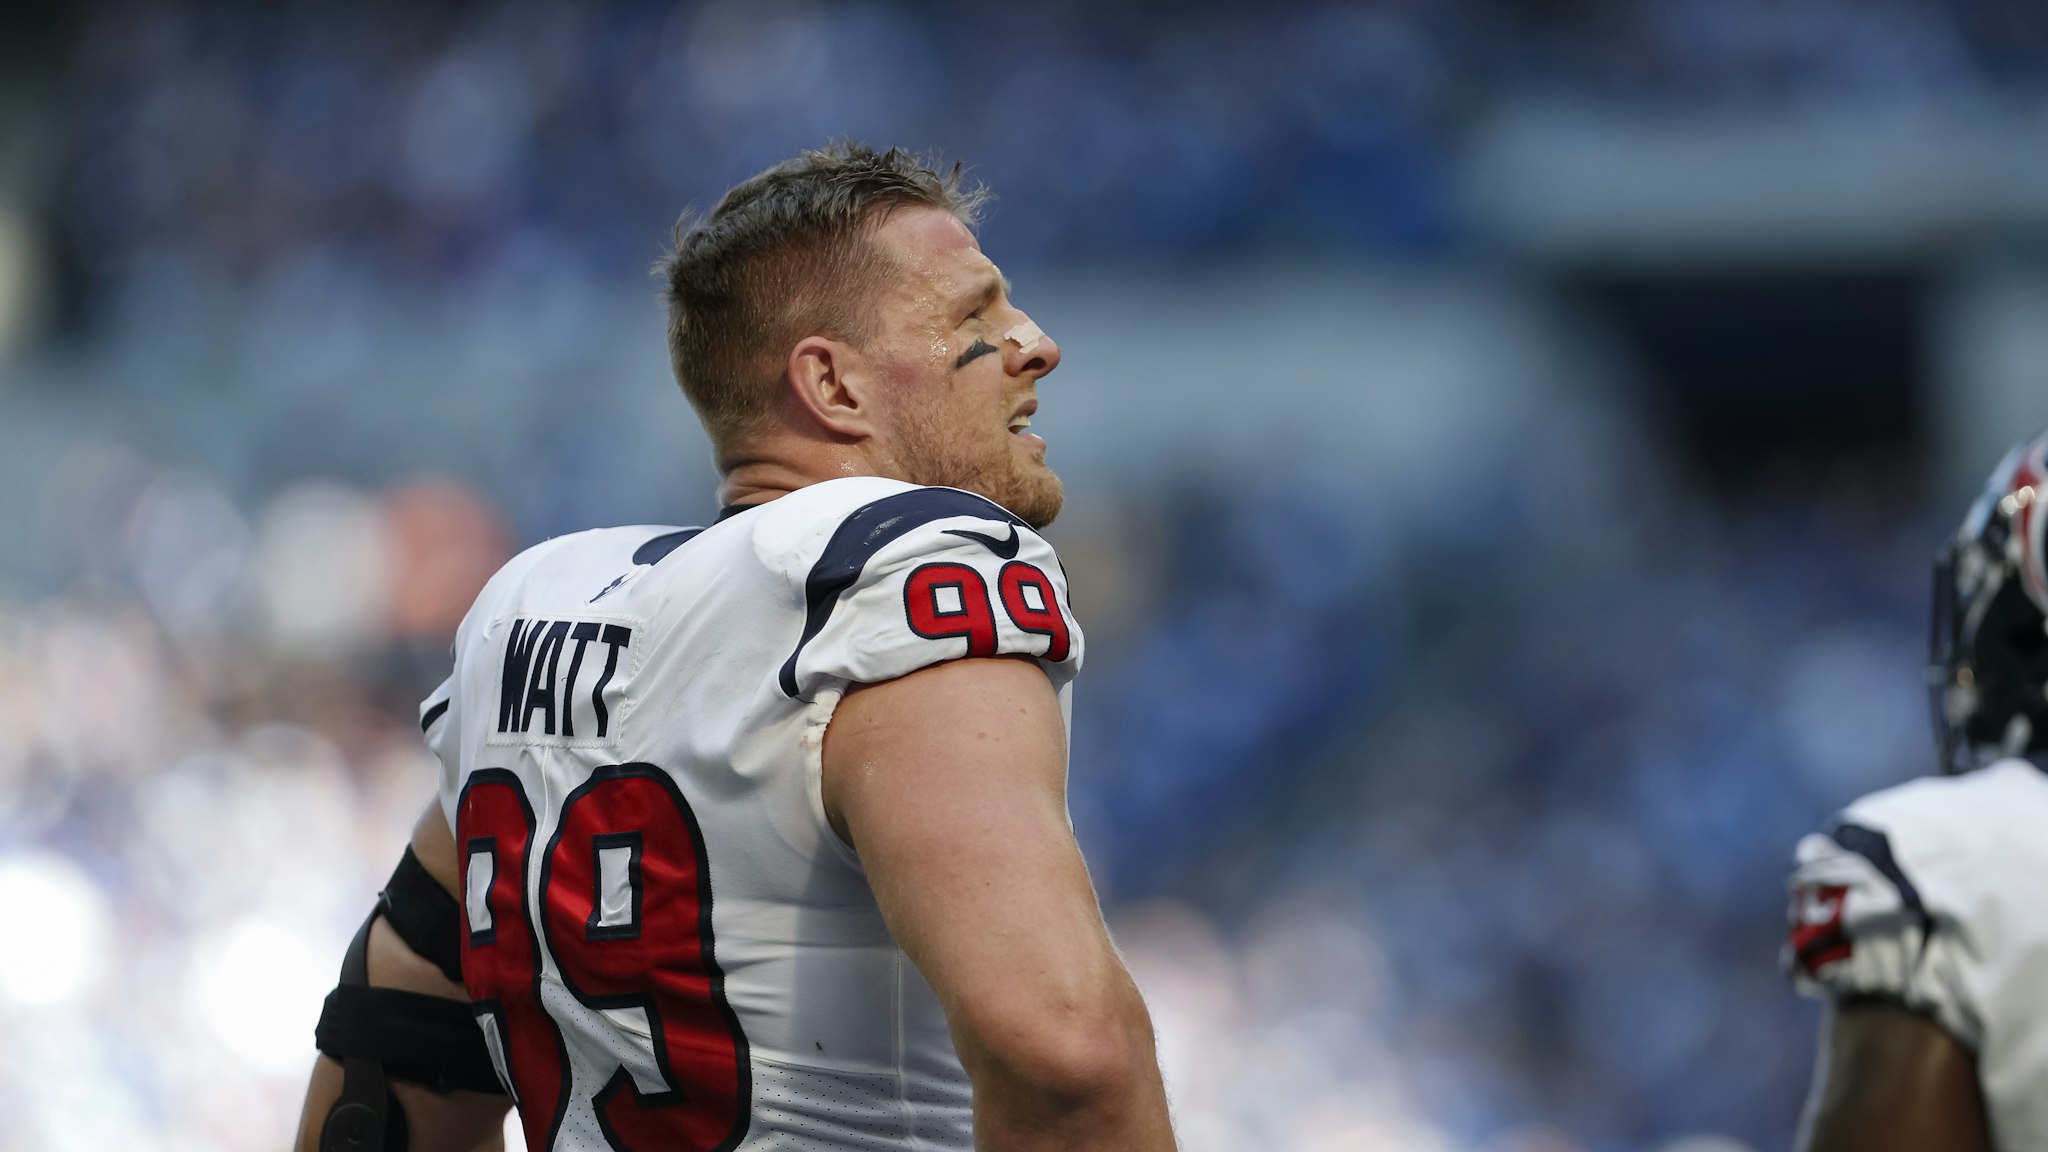 INDIANAPOLIS, IN - OCTOBER 20: J.J. Watt #99 of the Houston Texans is seen during the game against the Indianapolis Colts at Lucas Oil Stadium on October 20, 2019 in Indianapolis, Indiana. (Photo by Michael Hickey/Getty Images)INDIANAPOLIS, IN - OCTOBER 20: J.J. Watt #99 of the Houston Texans is seen during the game against the Indianapolis Colts at Lucas Oil Stadium on October 20, 2019 in Indianapolis, Indiana. (Photo by Michael Hickey/Getty Images)